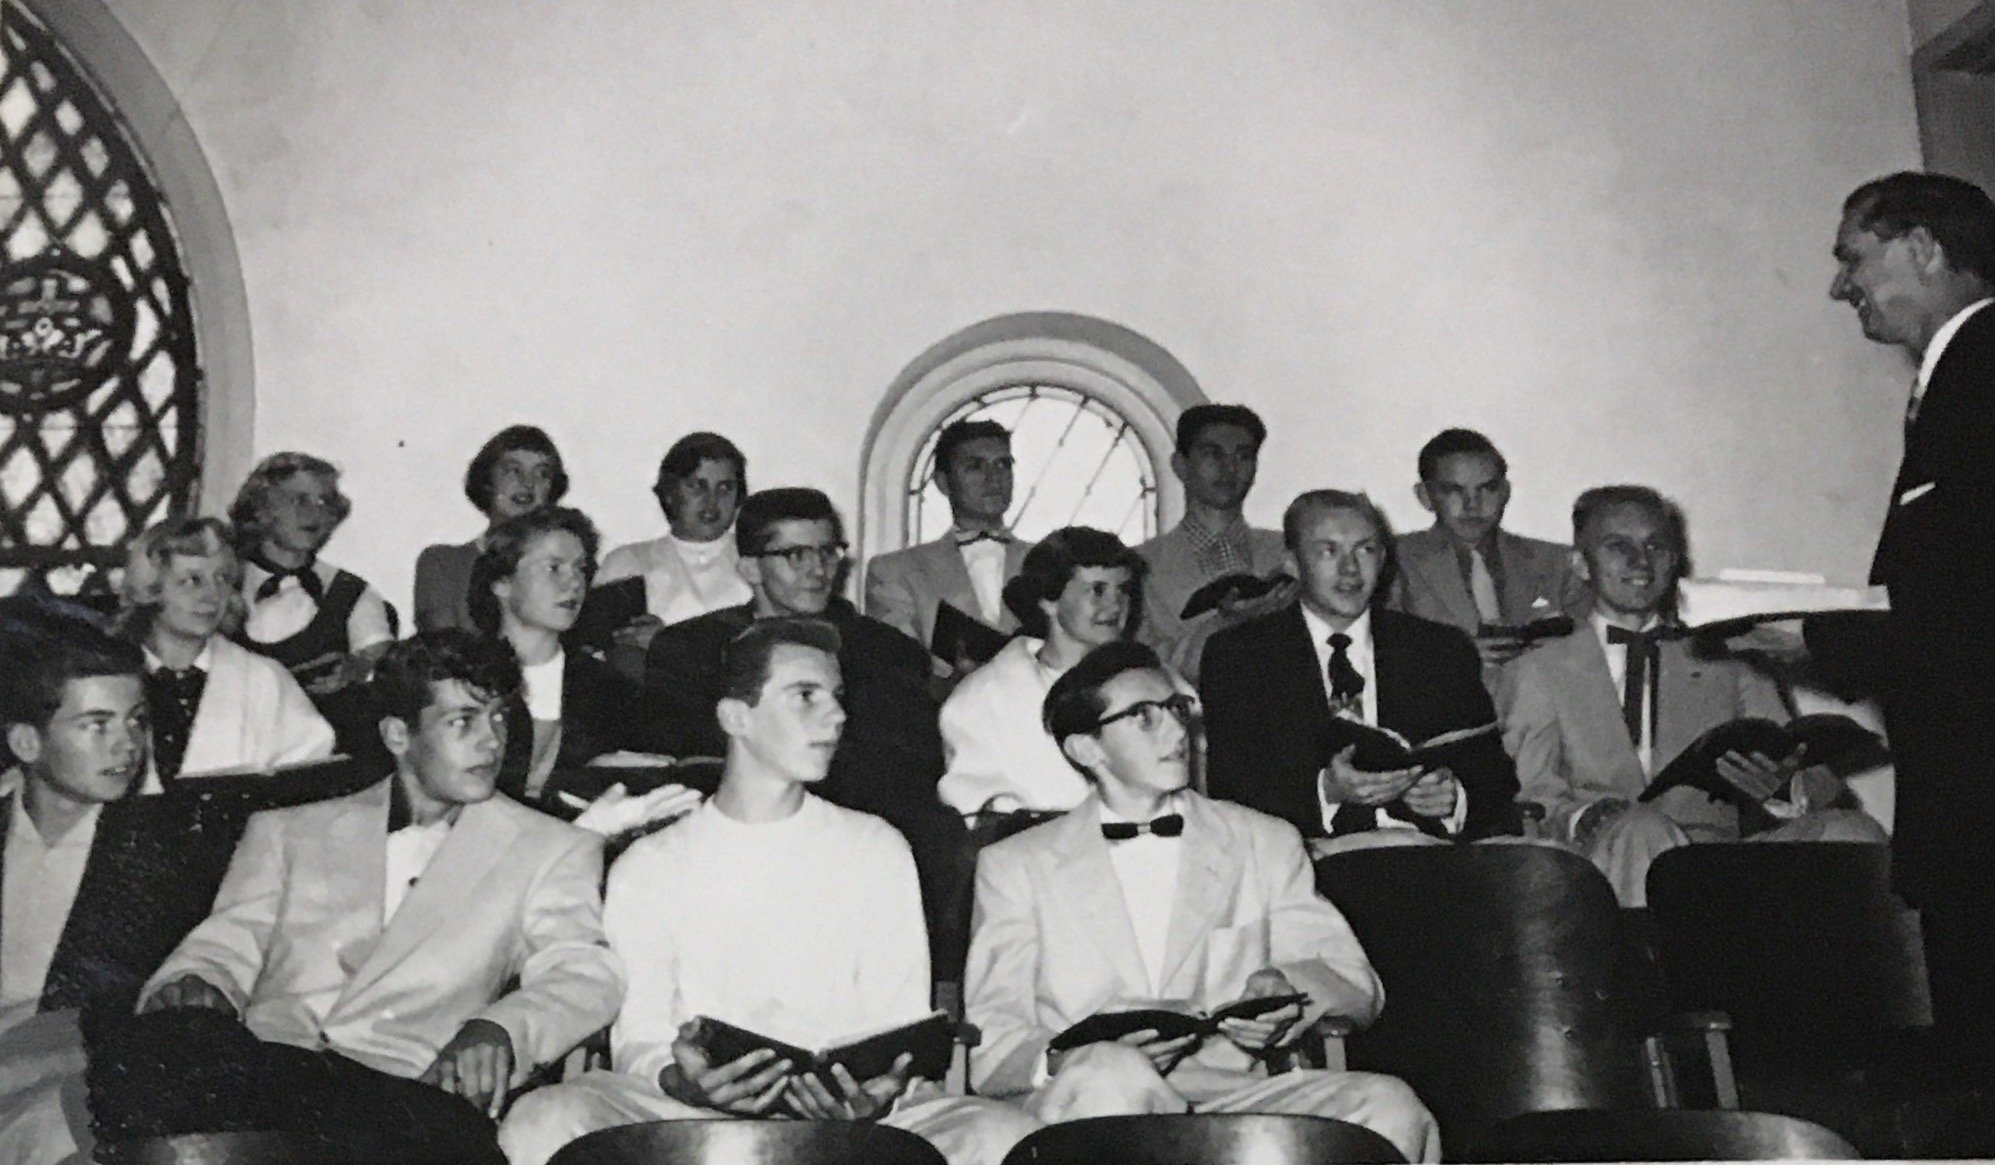 Young people's class, 1950s